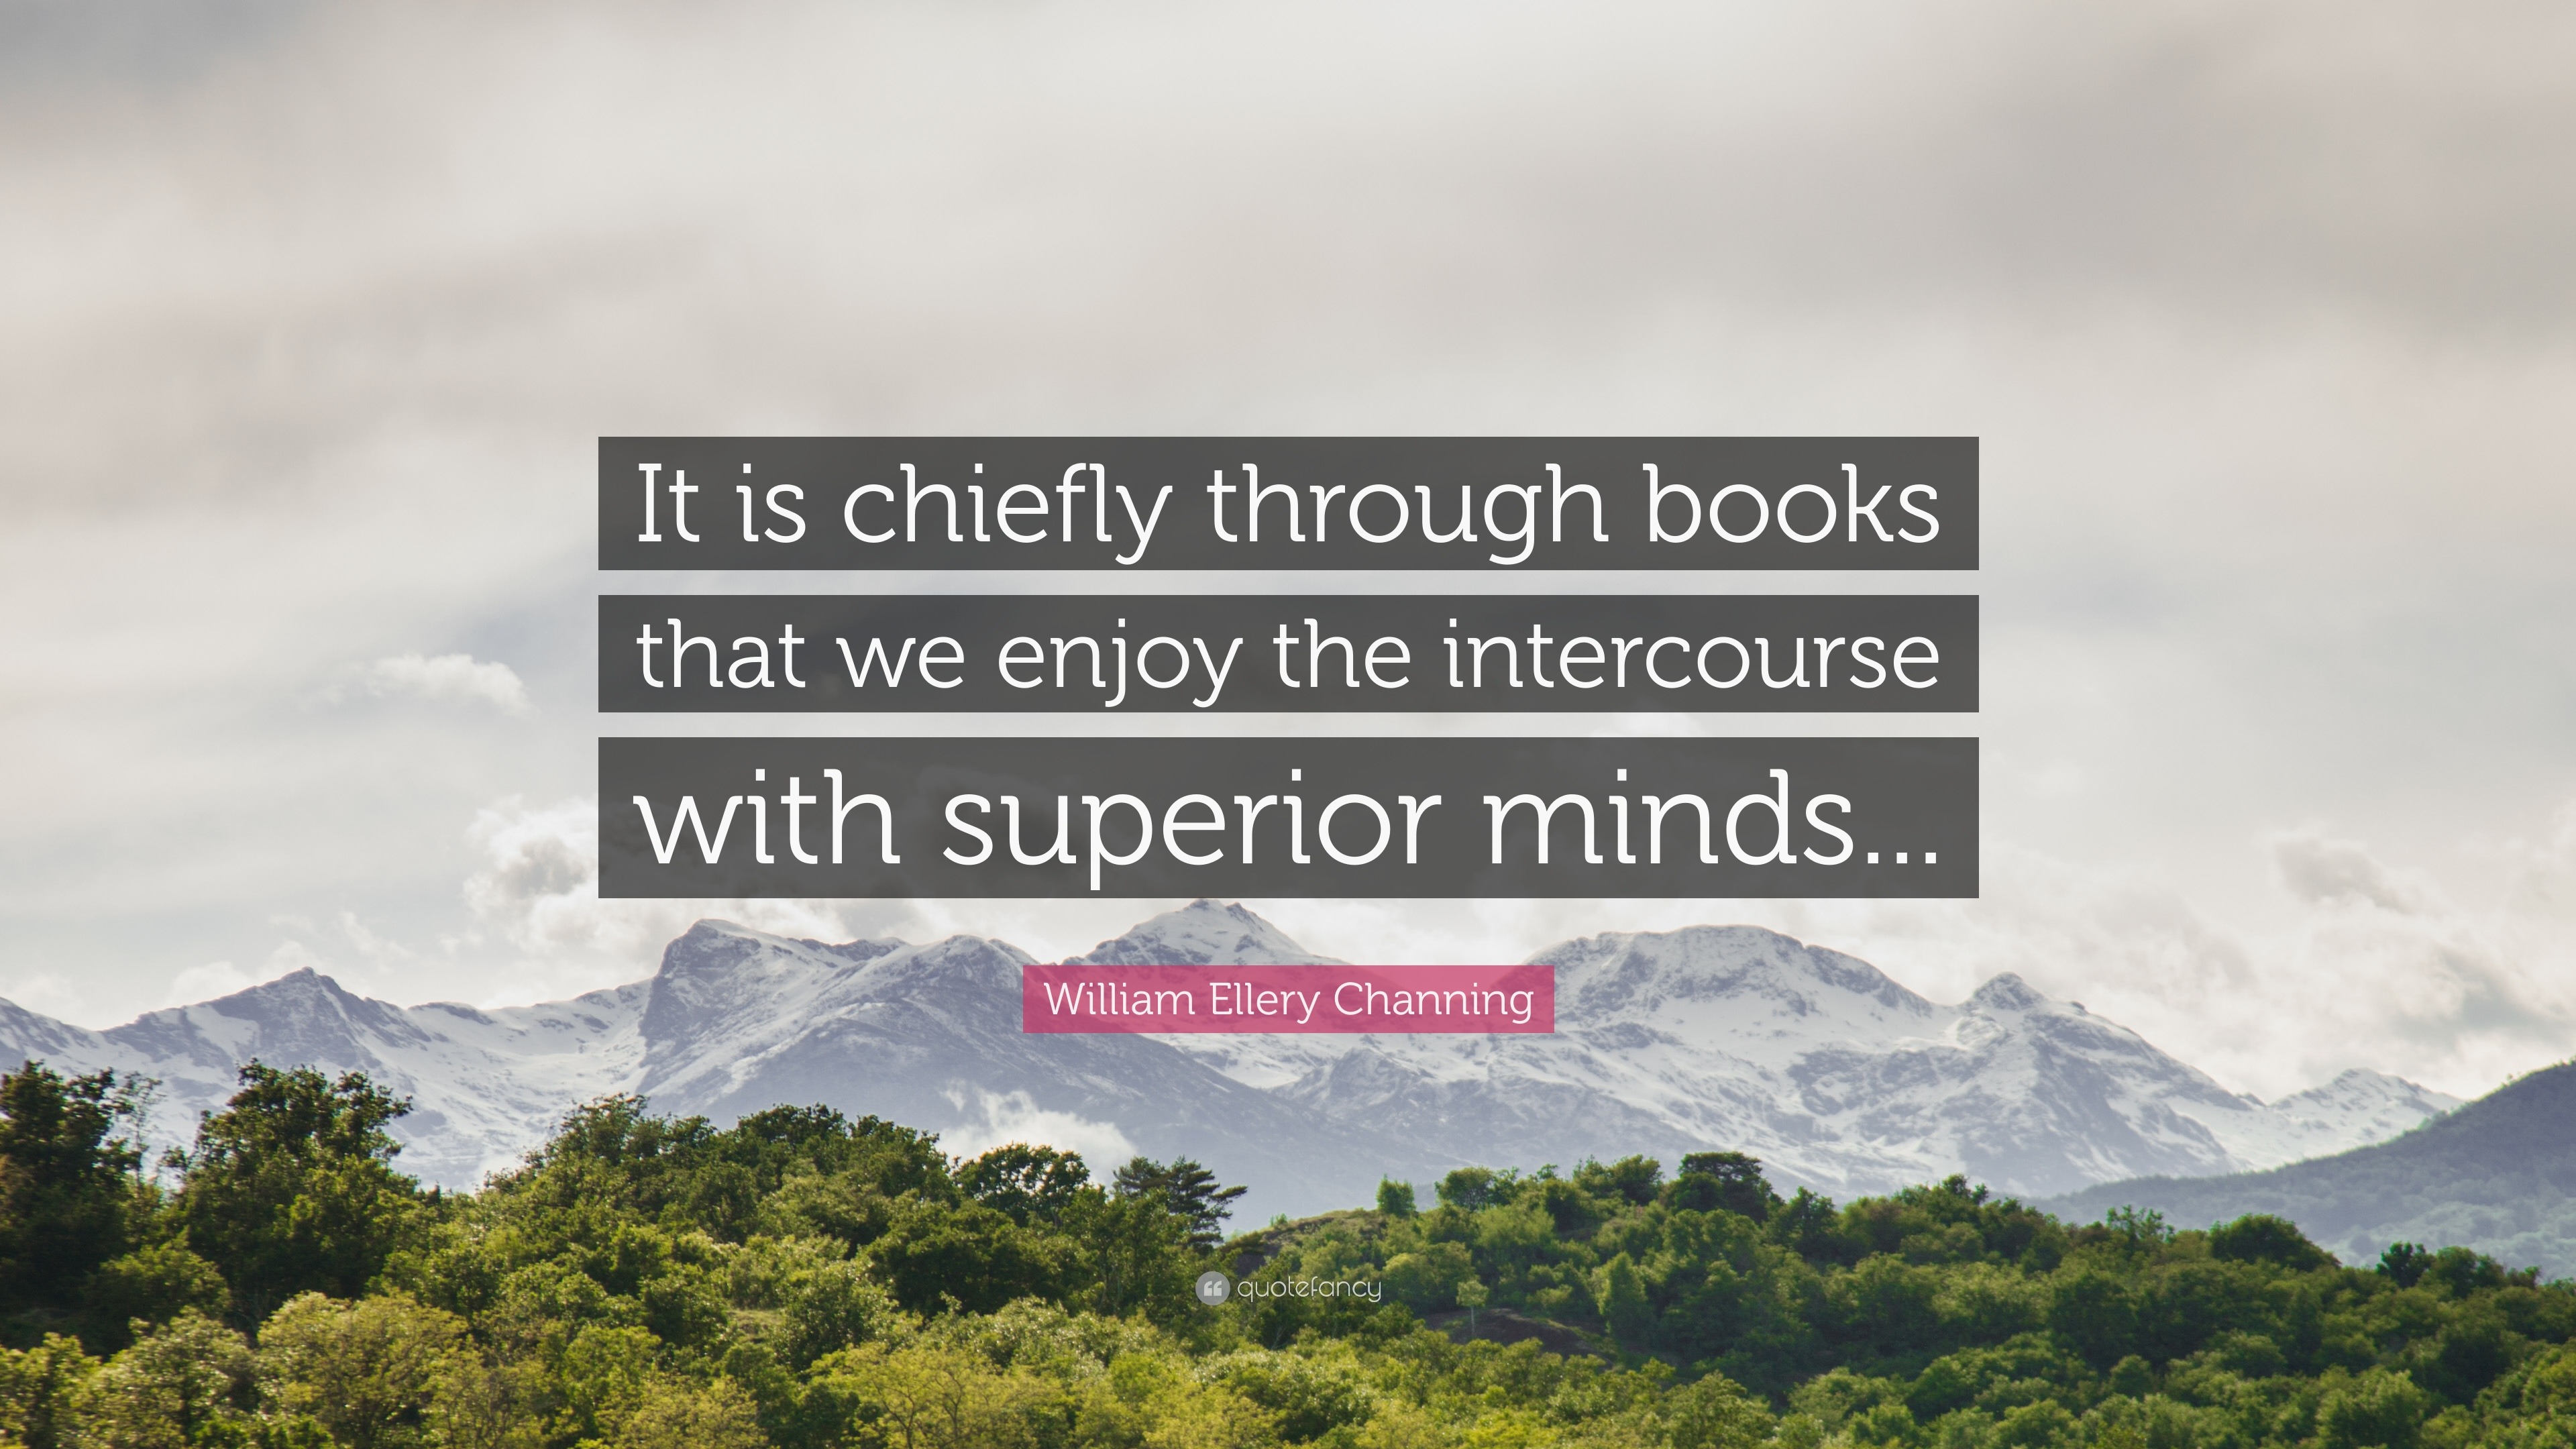 William Ellery Channing Quote: “It is chiefly through books that we ...